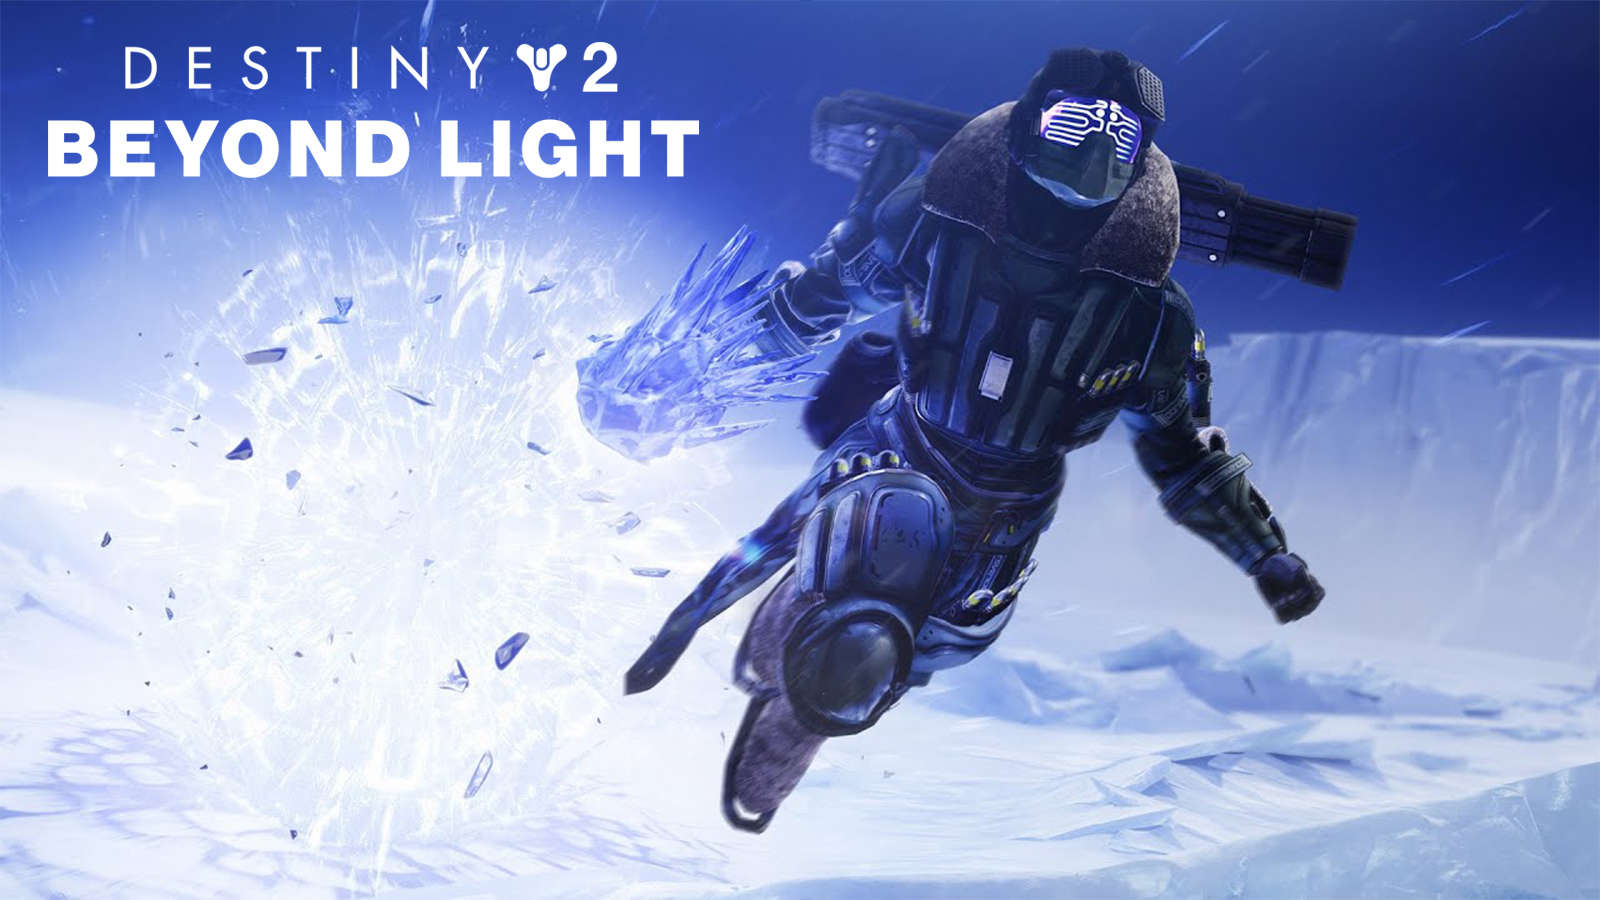 Everything Destiny 2 players need to do ahead of Beyond Light next week